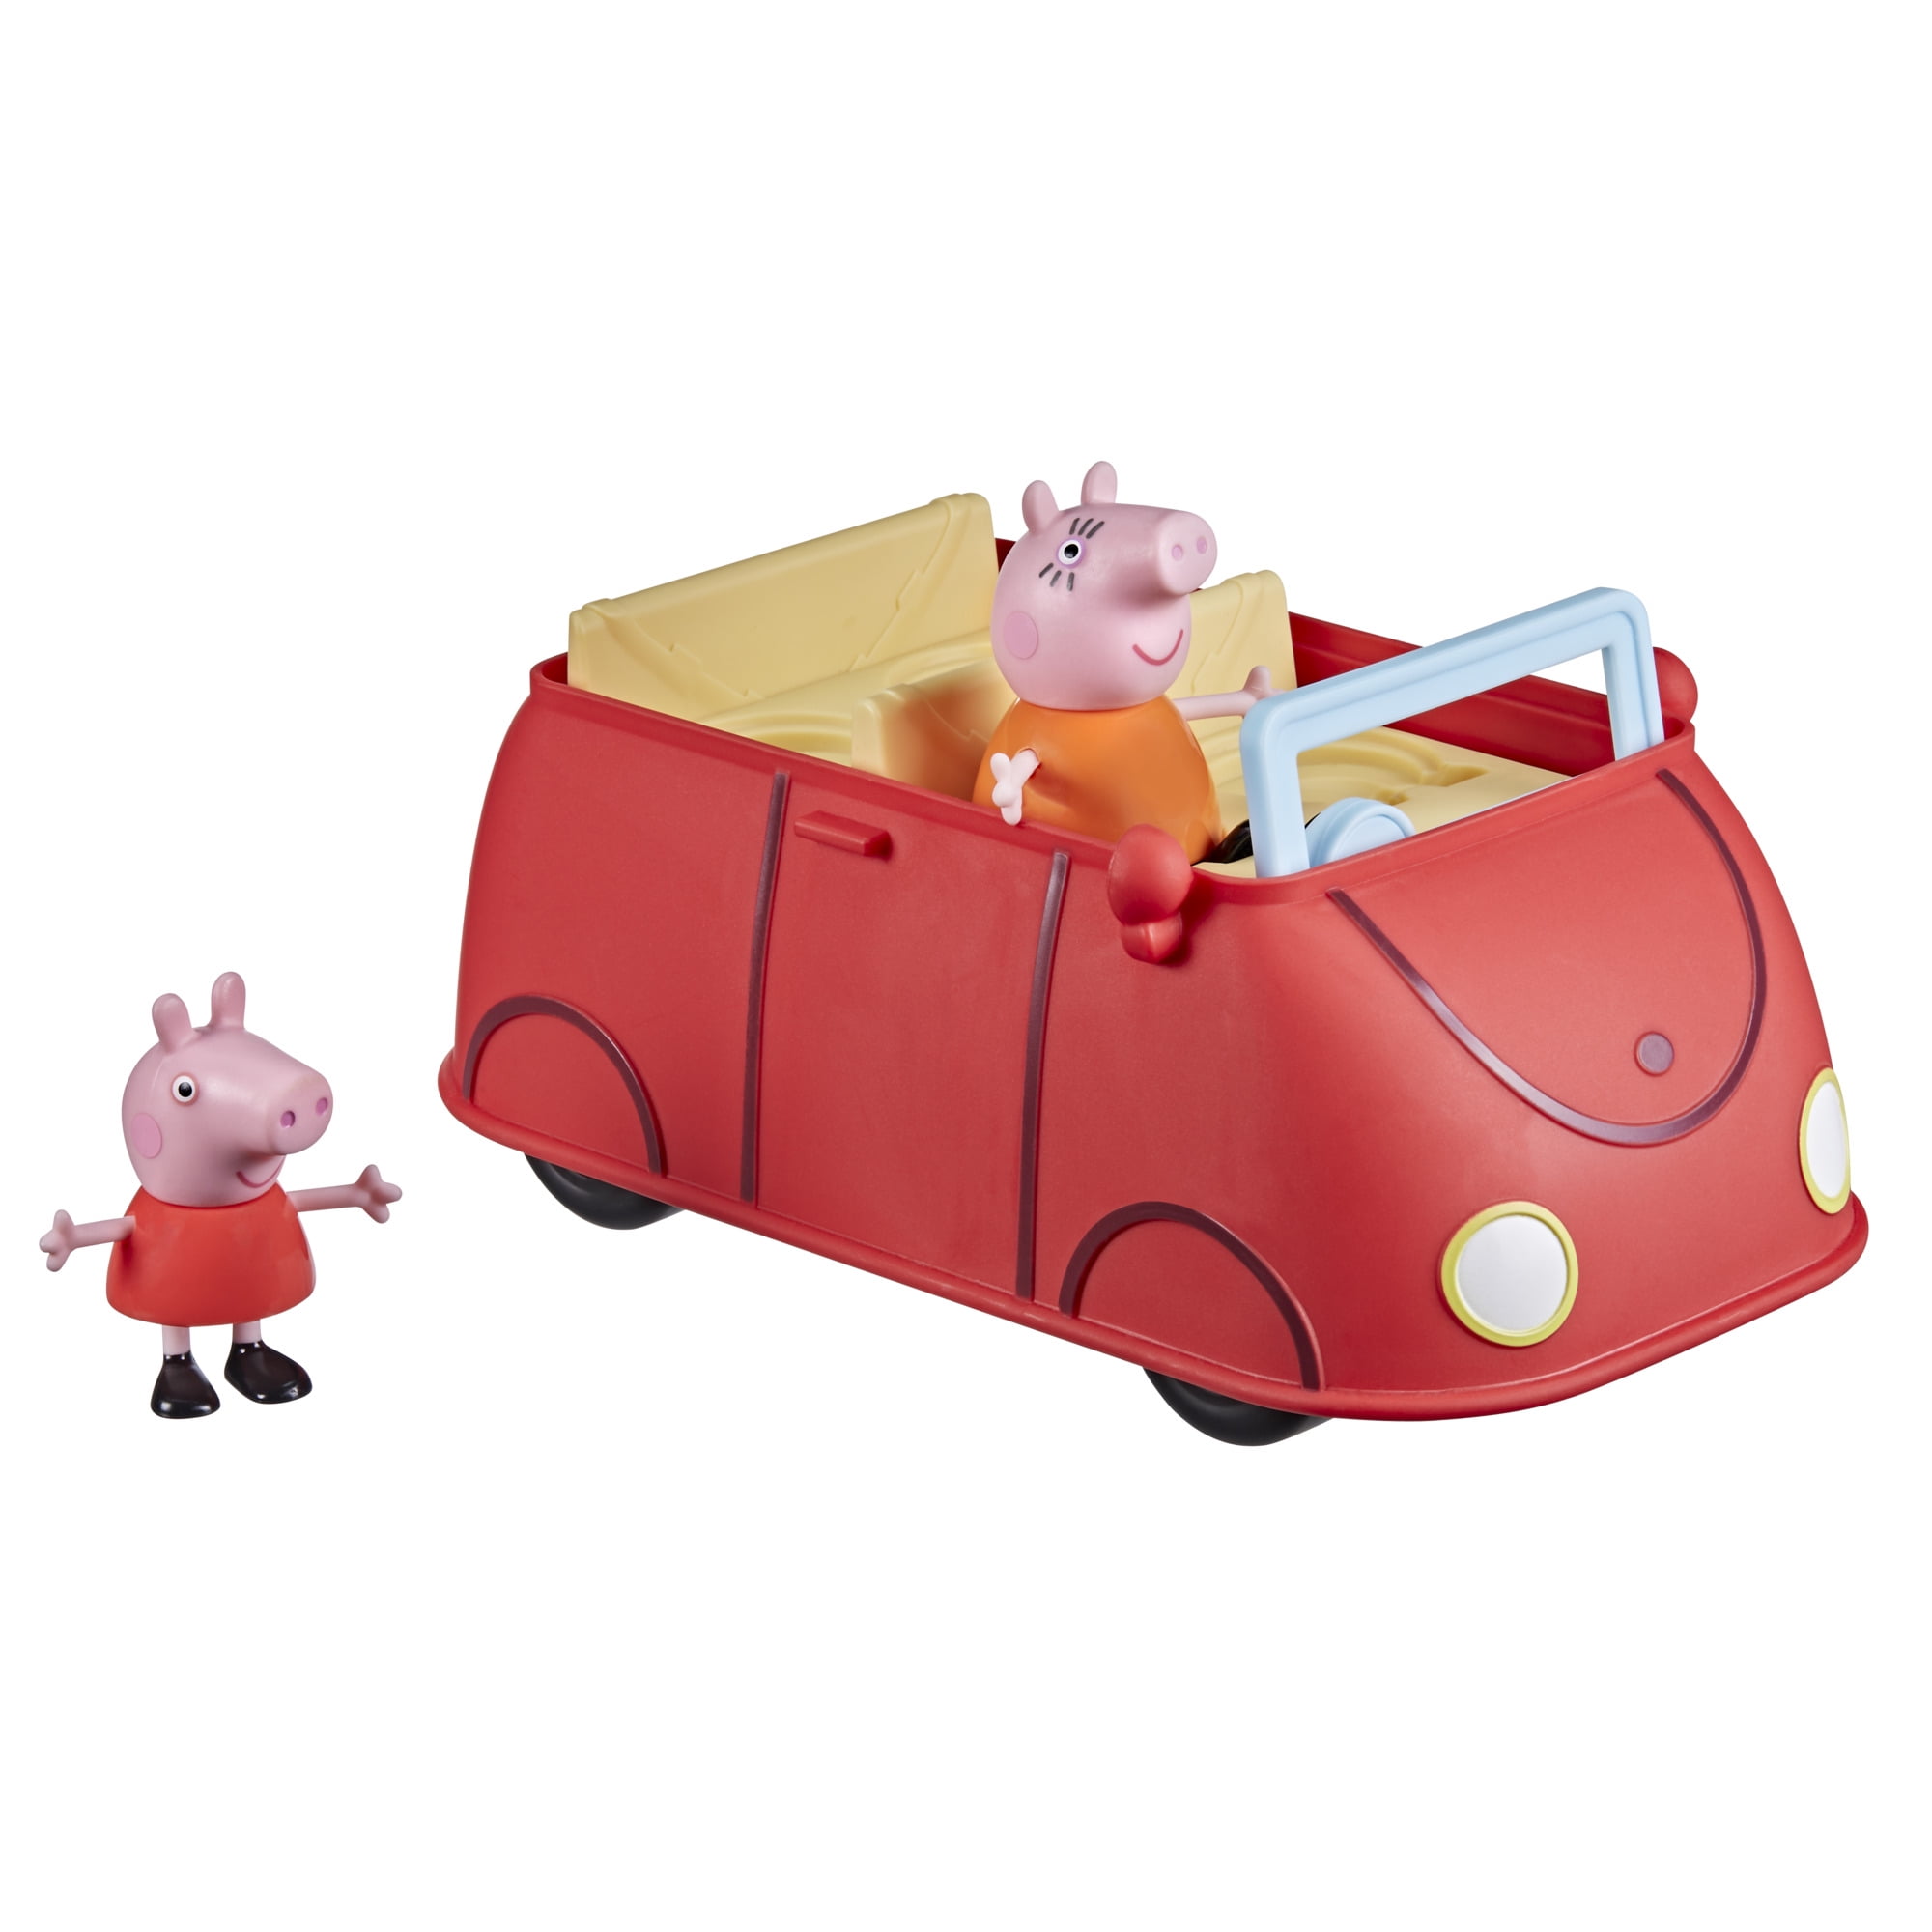 Mummy Daddy & Peppa Pig Figures Includes Sounds NEW Peppa Pig Push & Go Car 